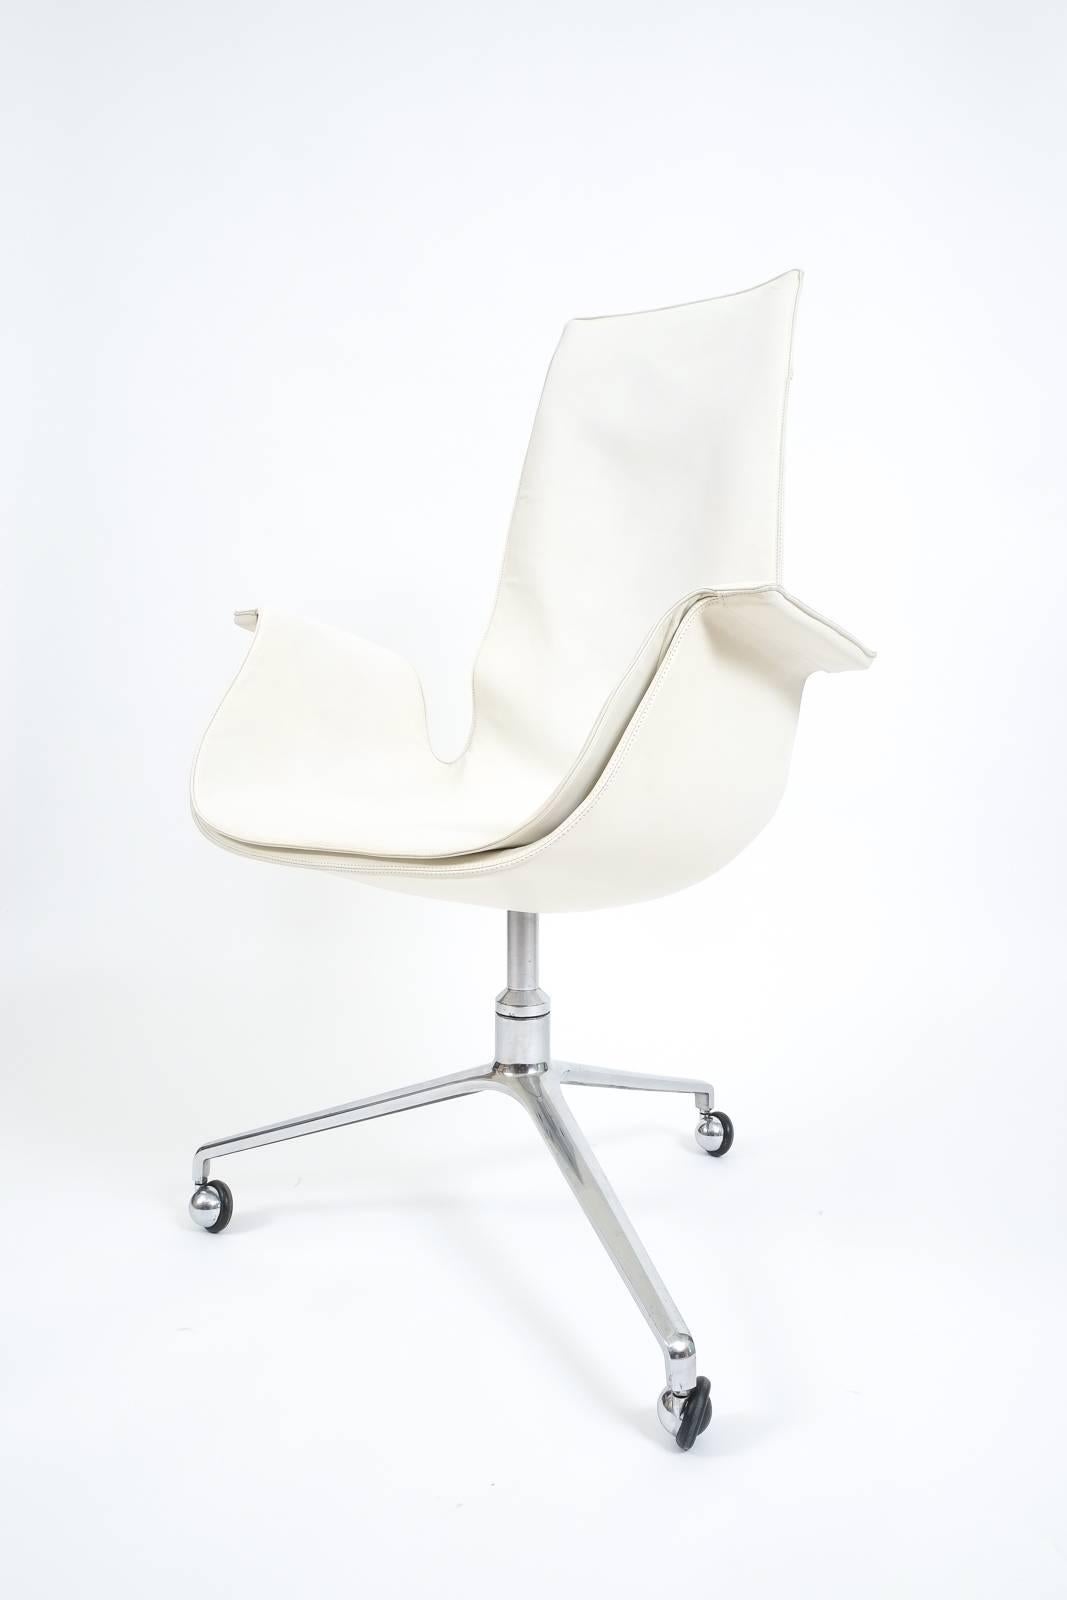 Original vintage white leather desk chair (seat height 19.29